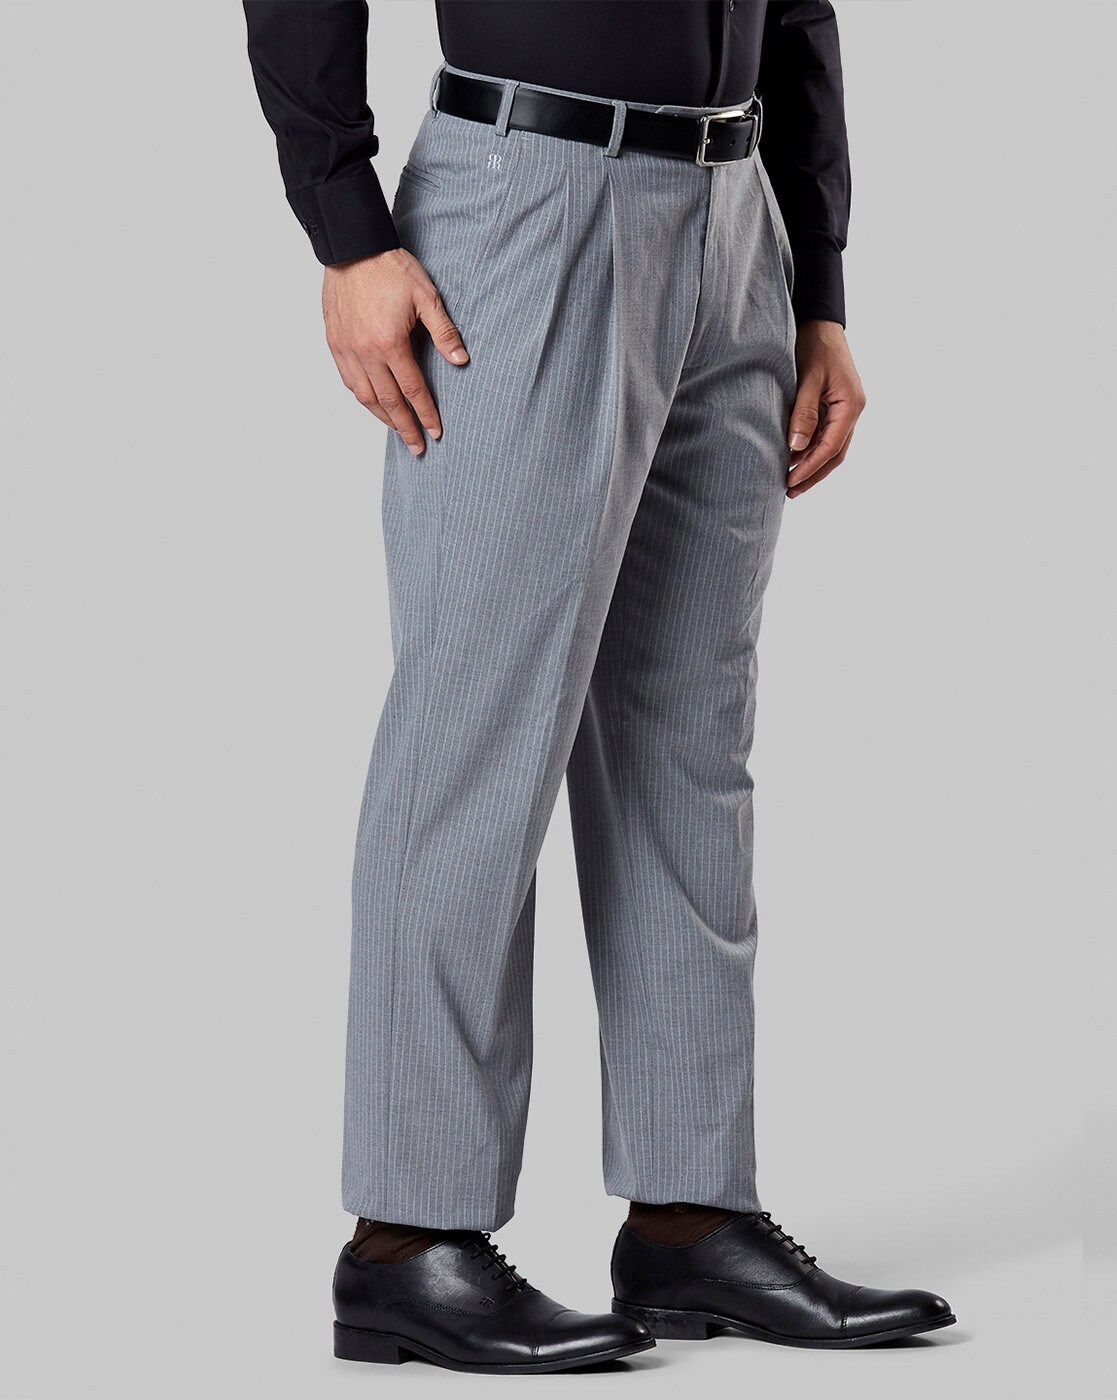 Buy Raymond Raymond Men Classic Wrinkle Free Pleated Trousers at Redfynd